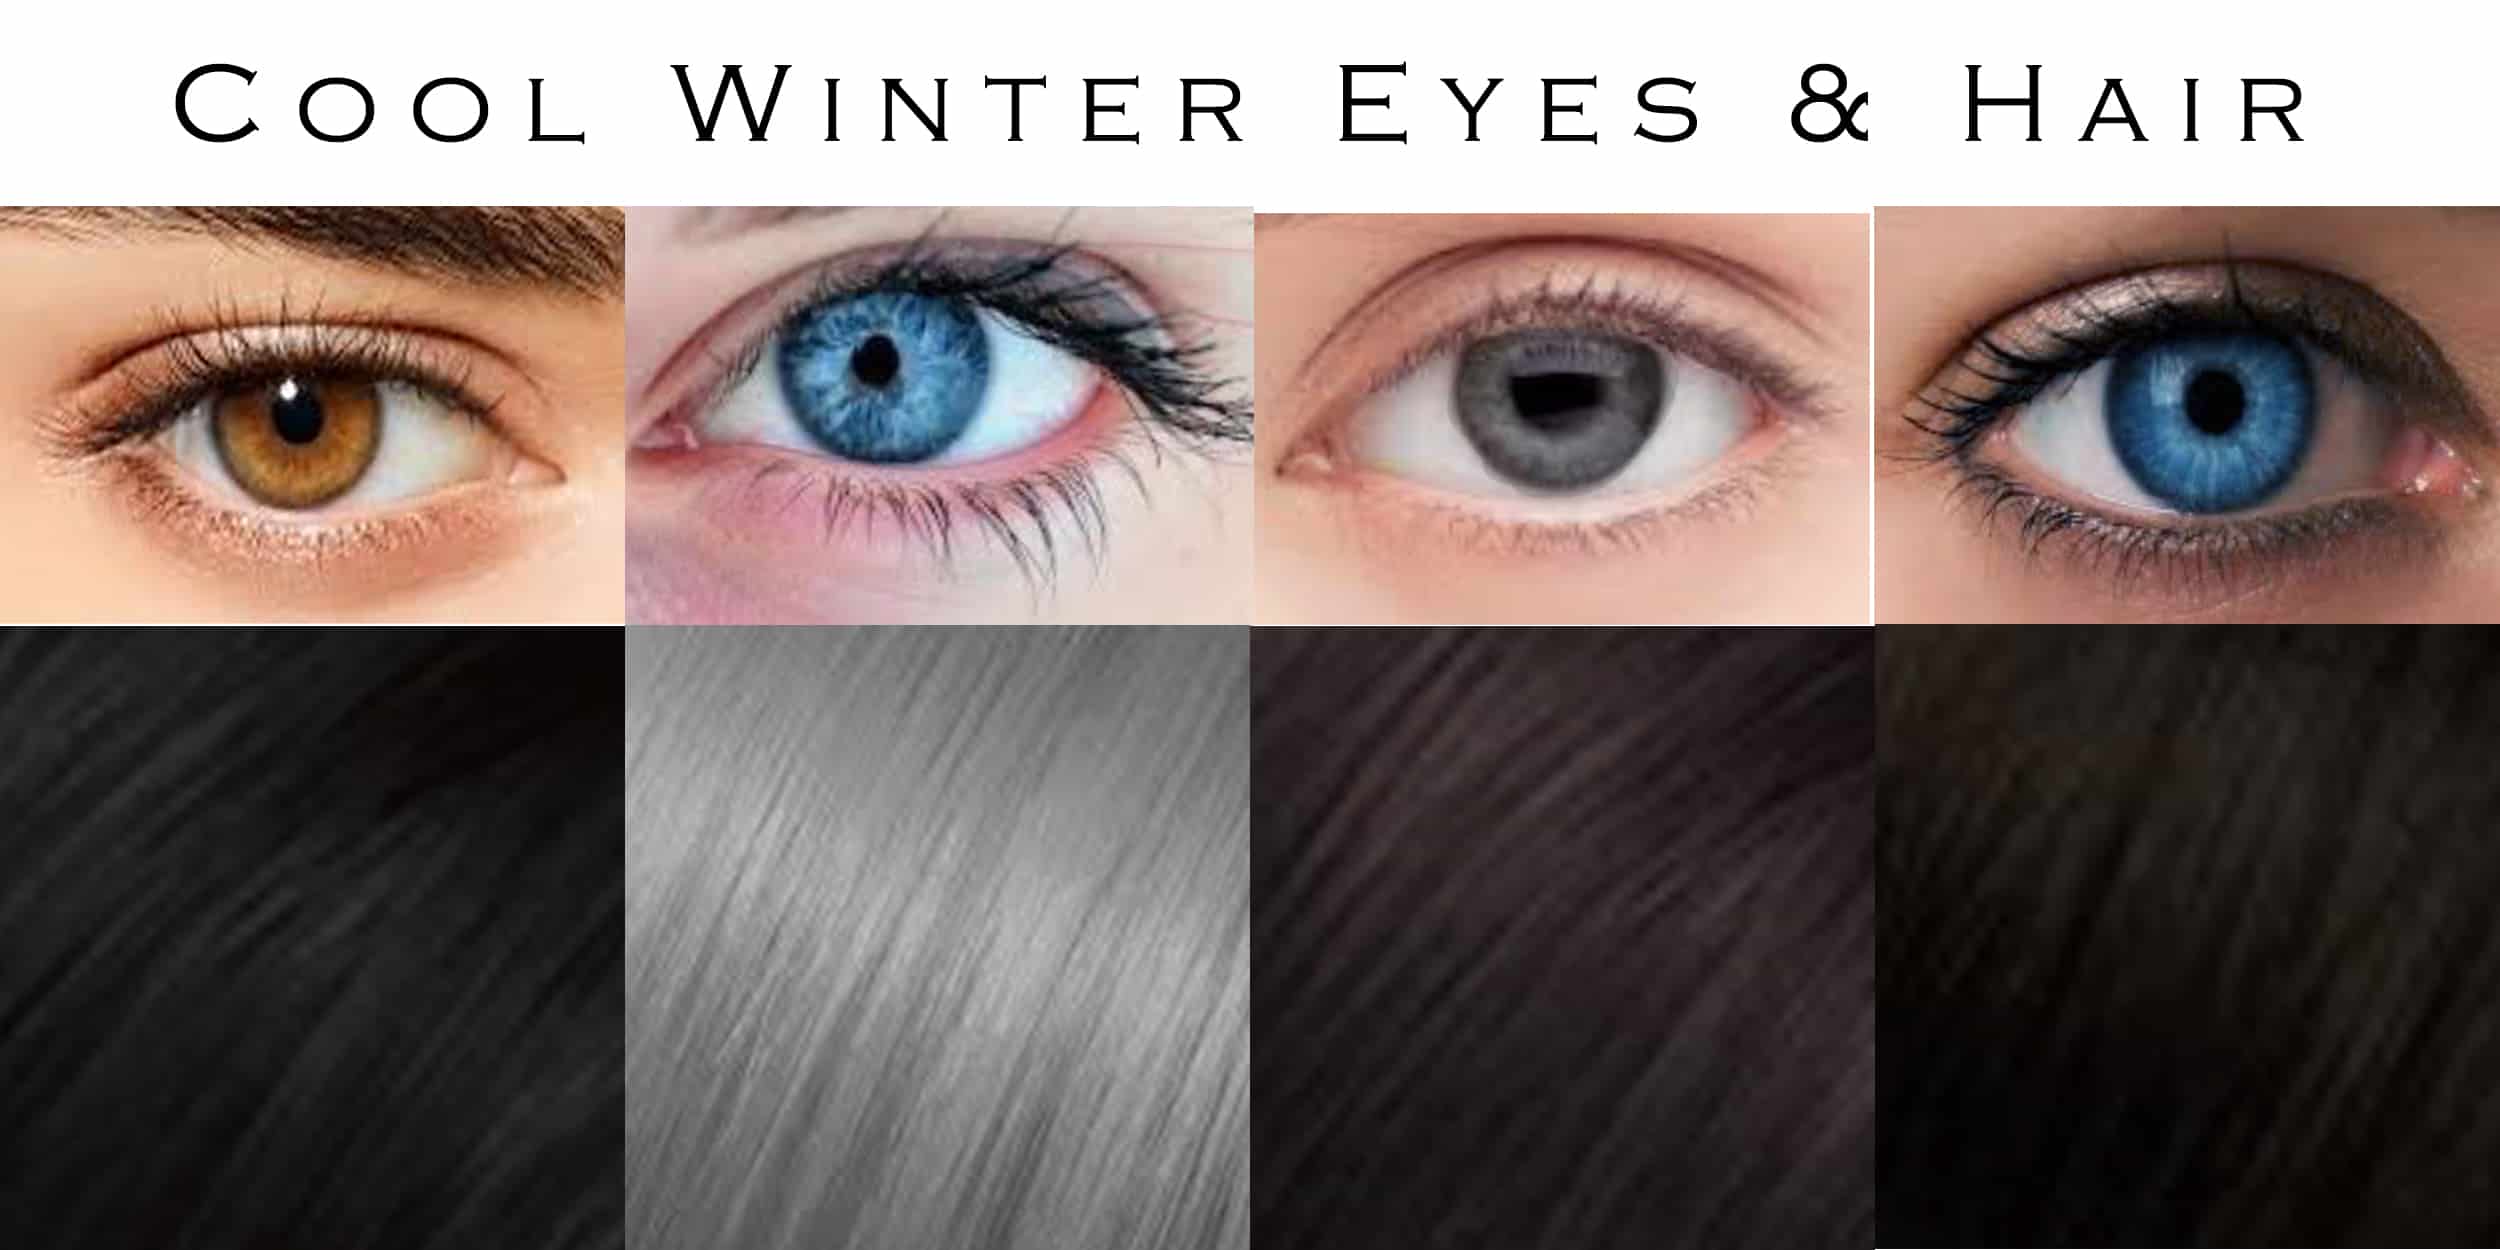 Cool winter eyes and hair.